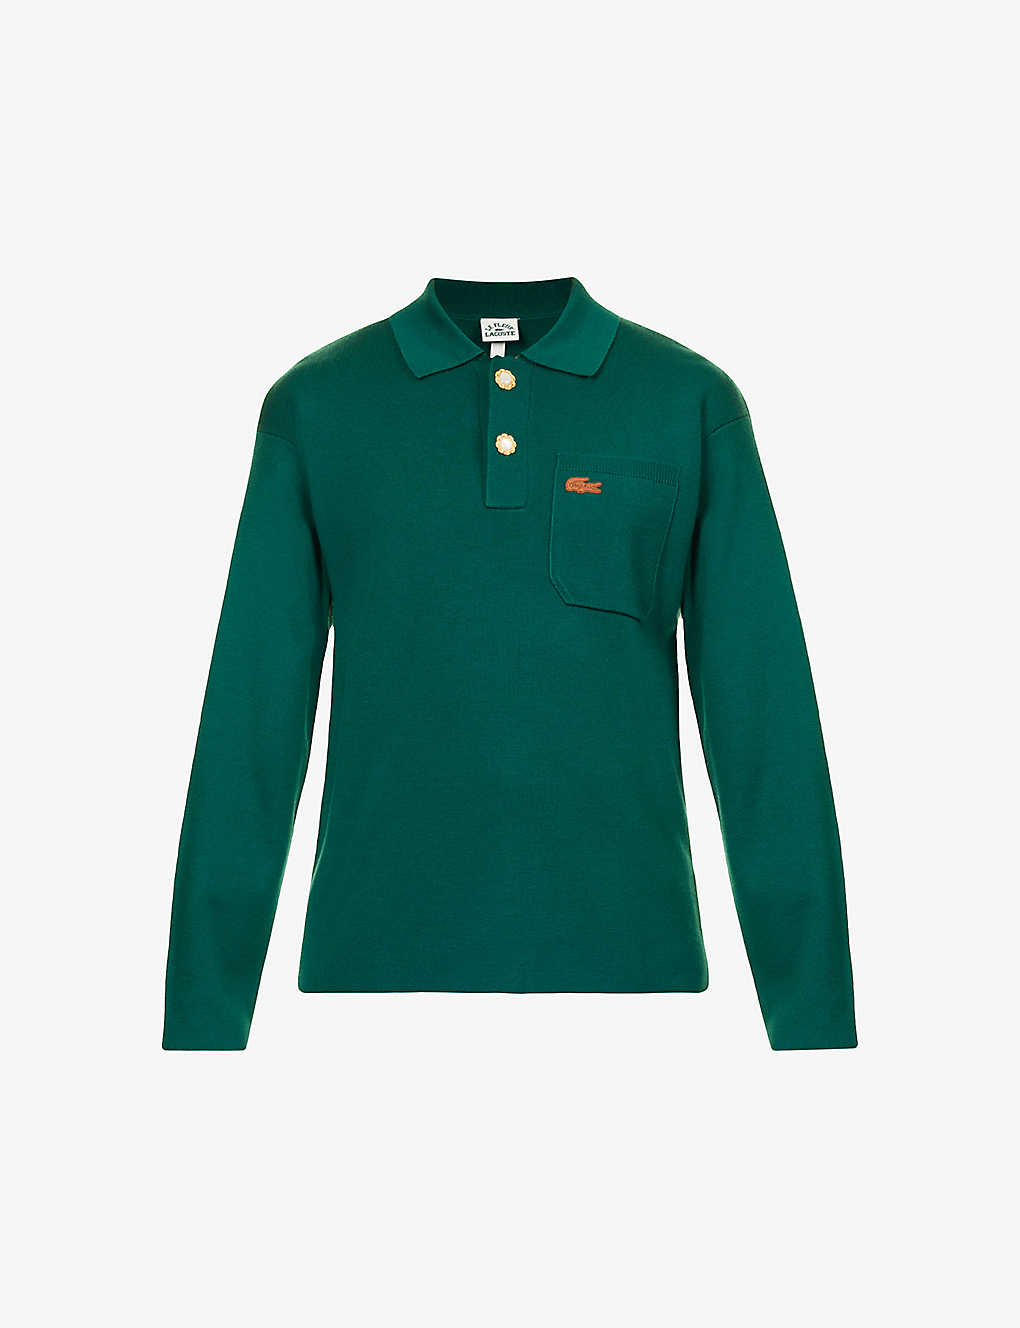 Lacoste Womens Swing Le Fleur* X Brand-appliqué Regular-fit Wool Knitted Polo Shirt